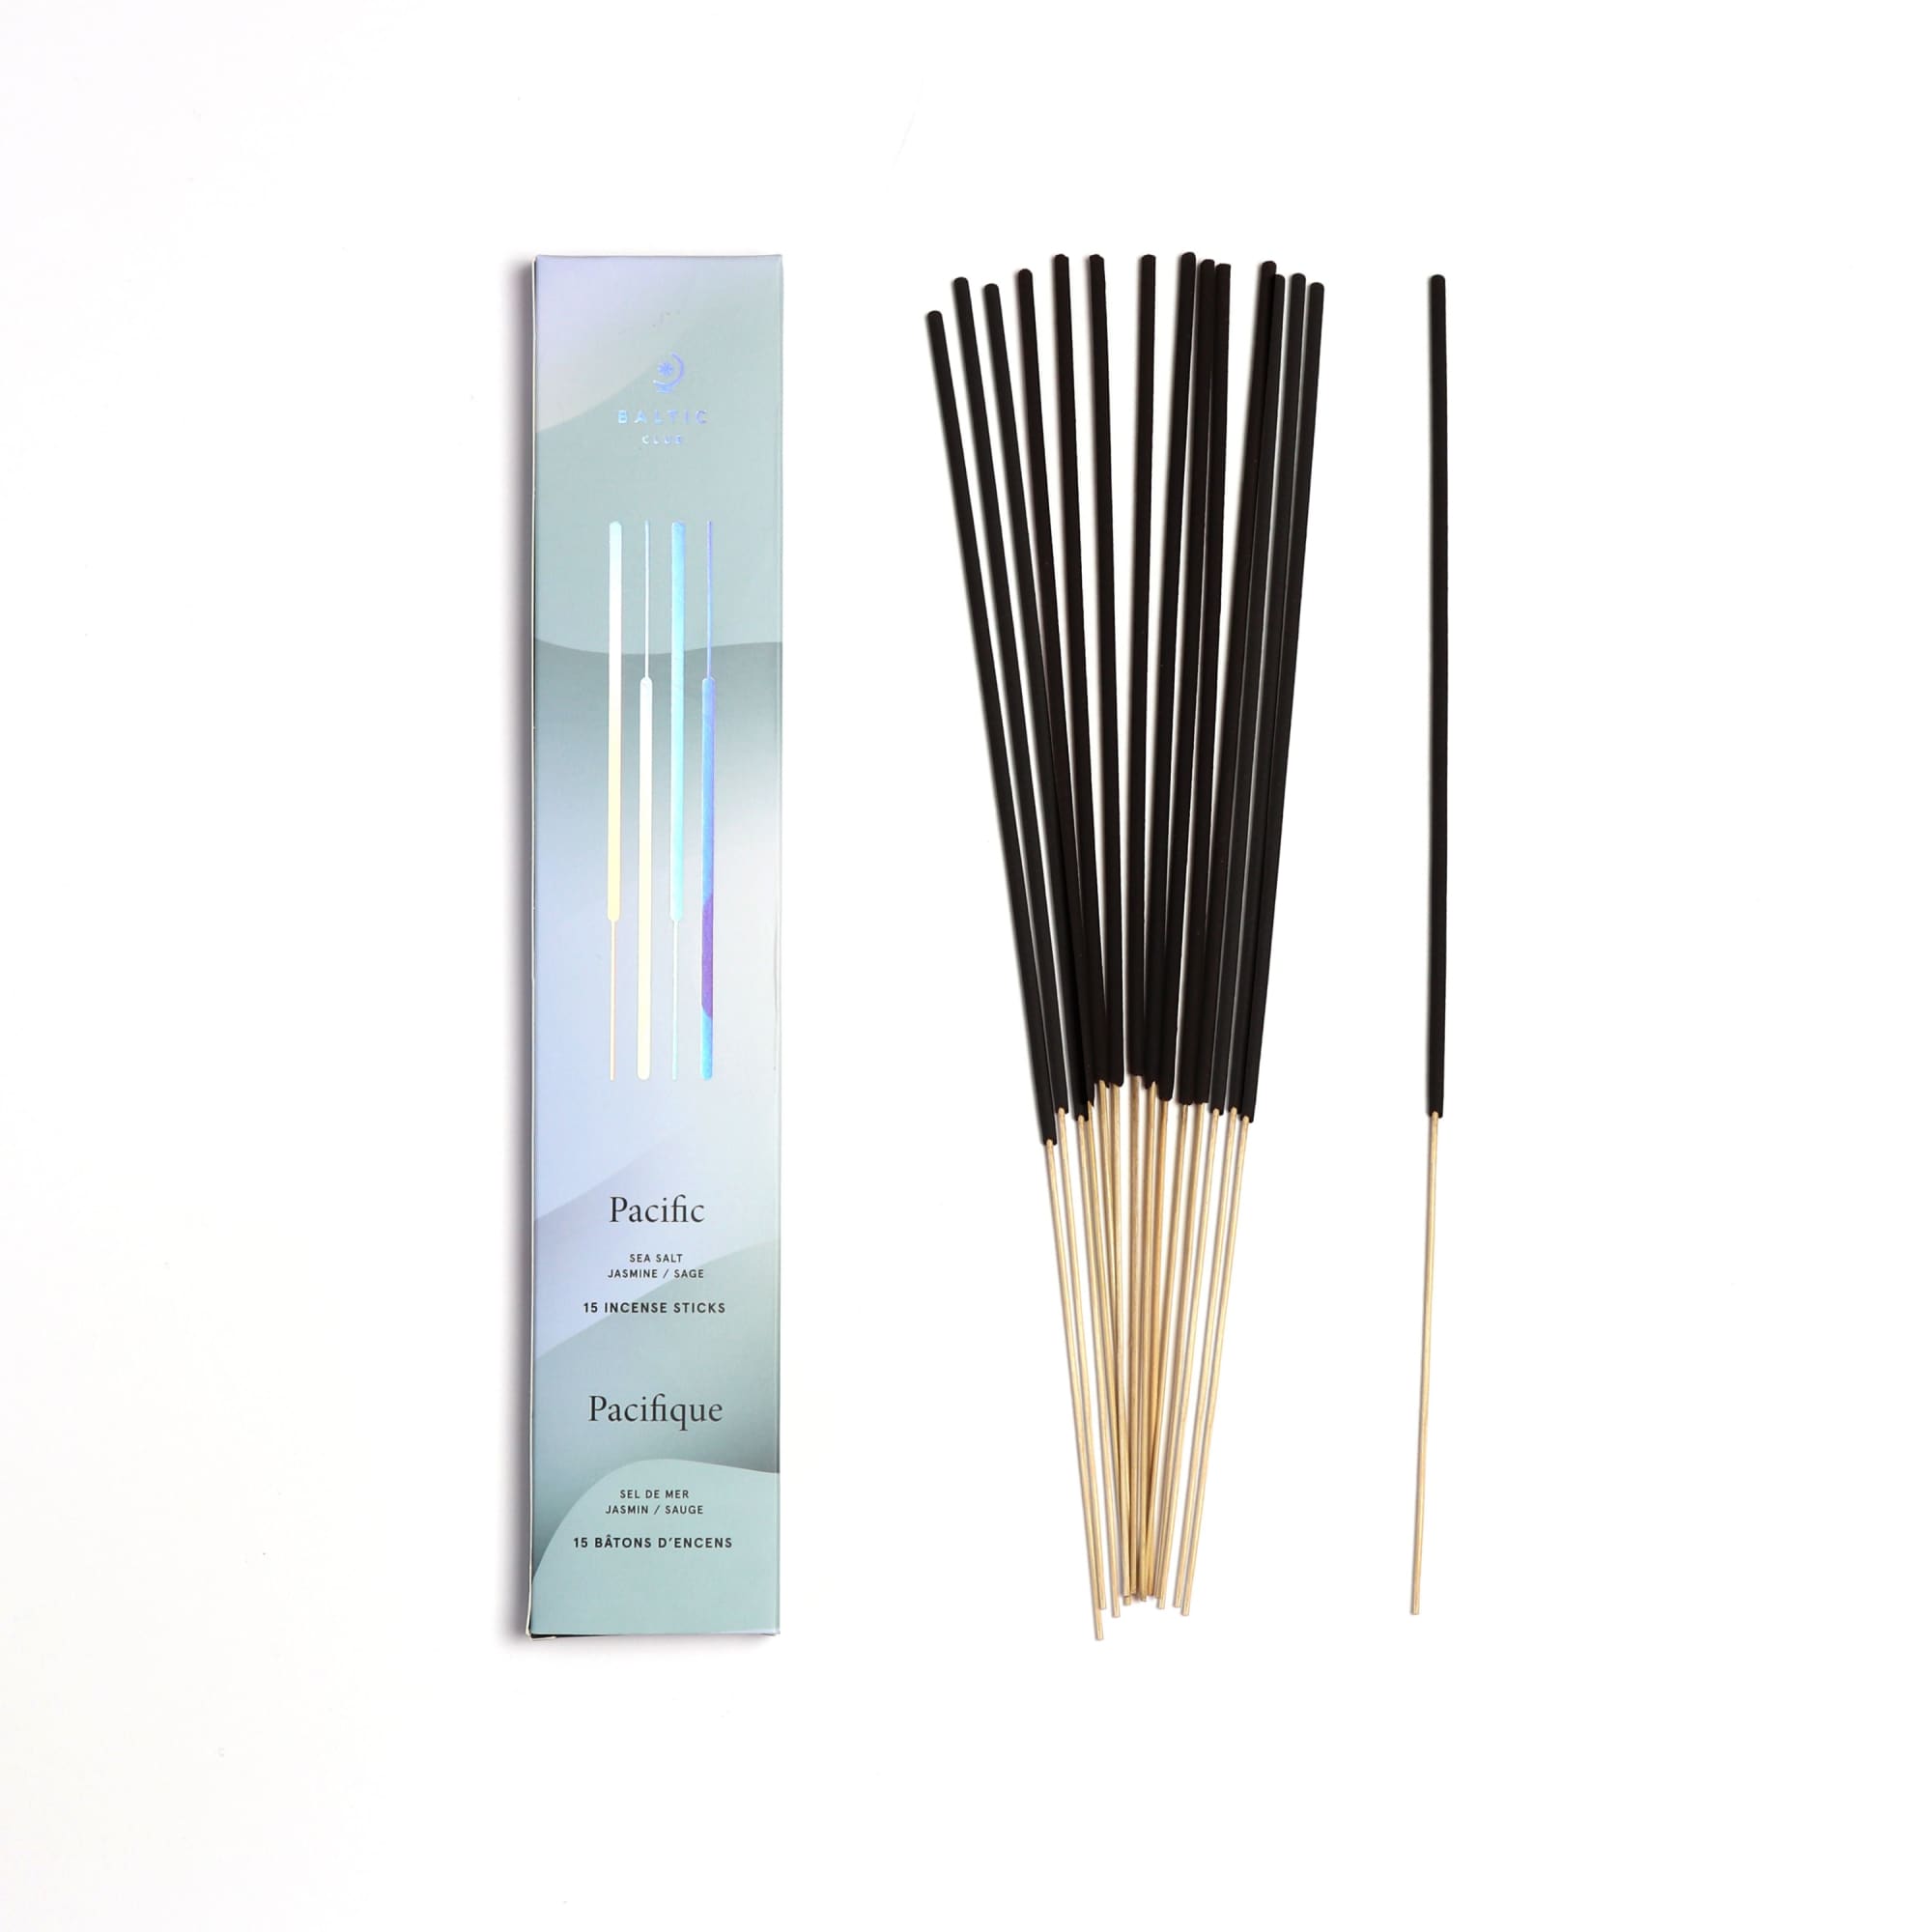 Pacific Incense Sticks box of 15, seen from above